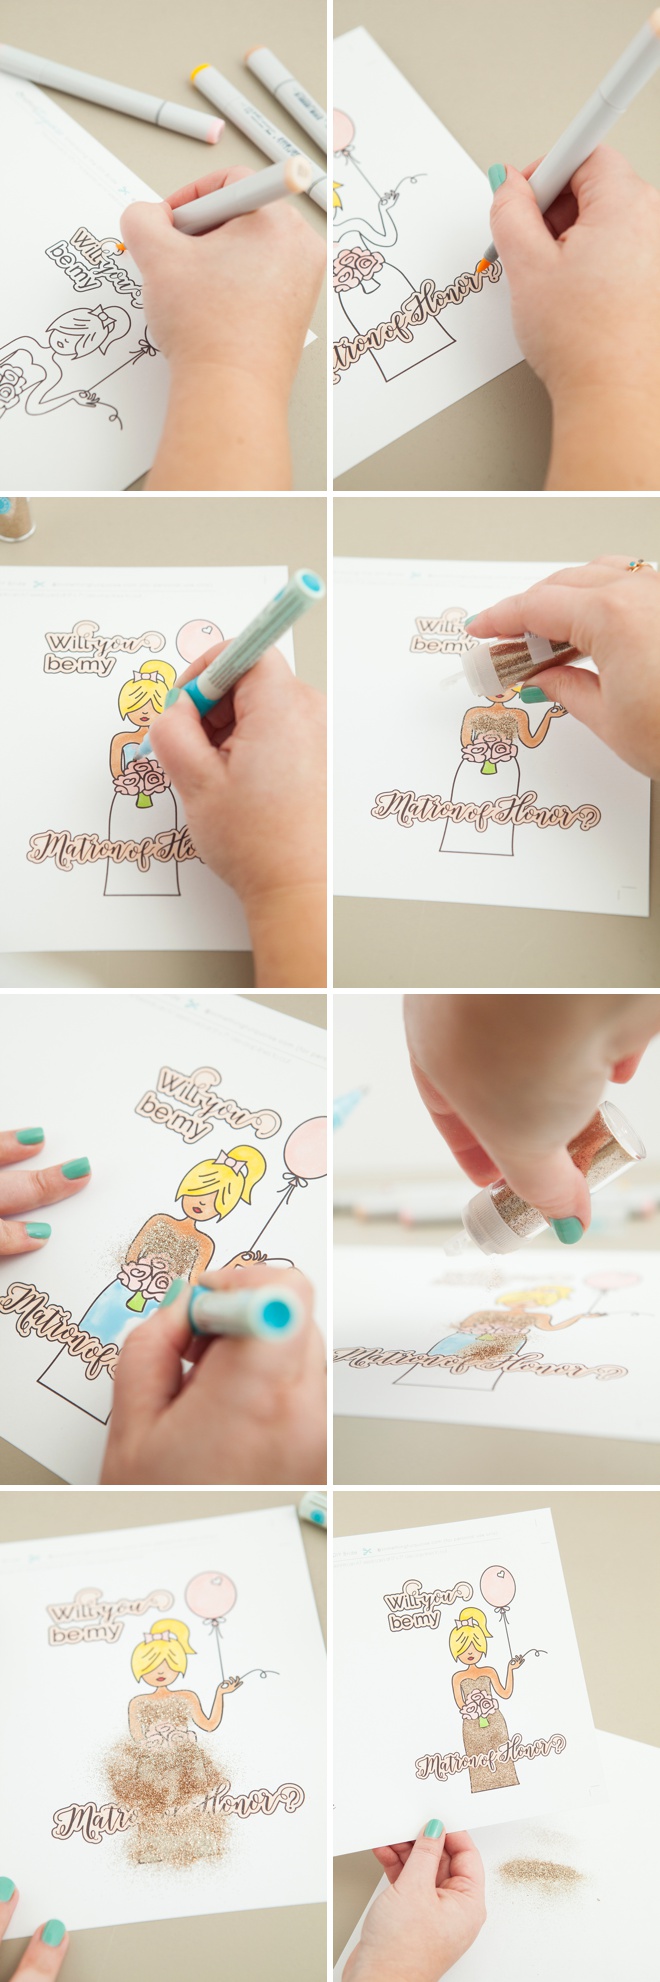 Free printable Will You Be My Bridesmaid card that you color!